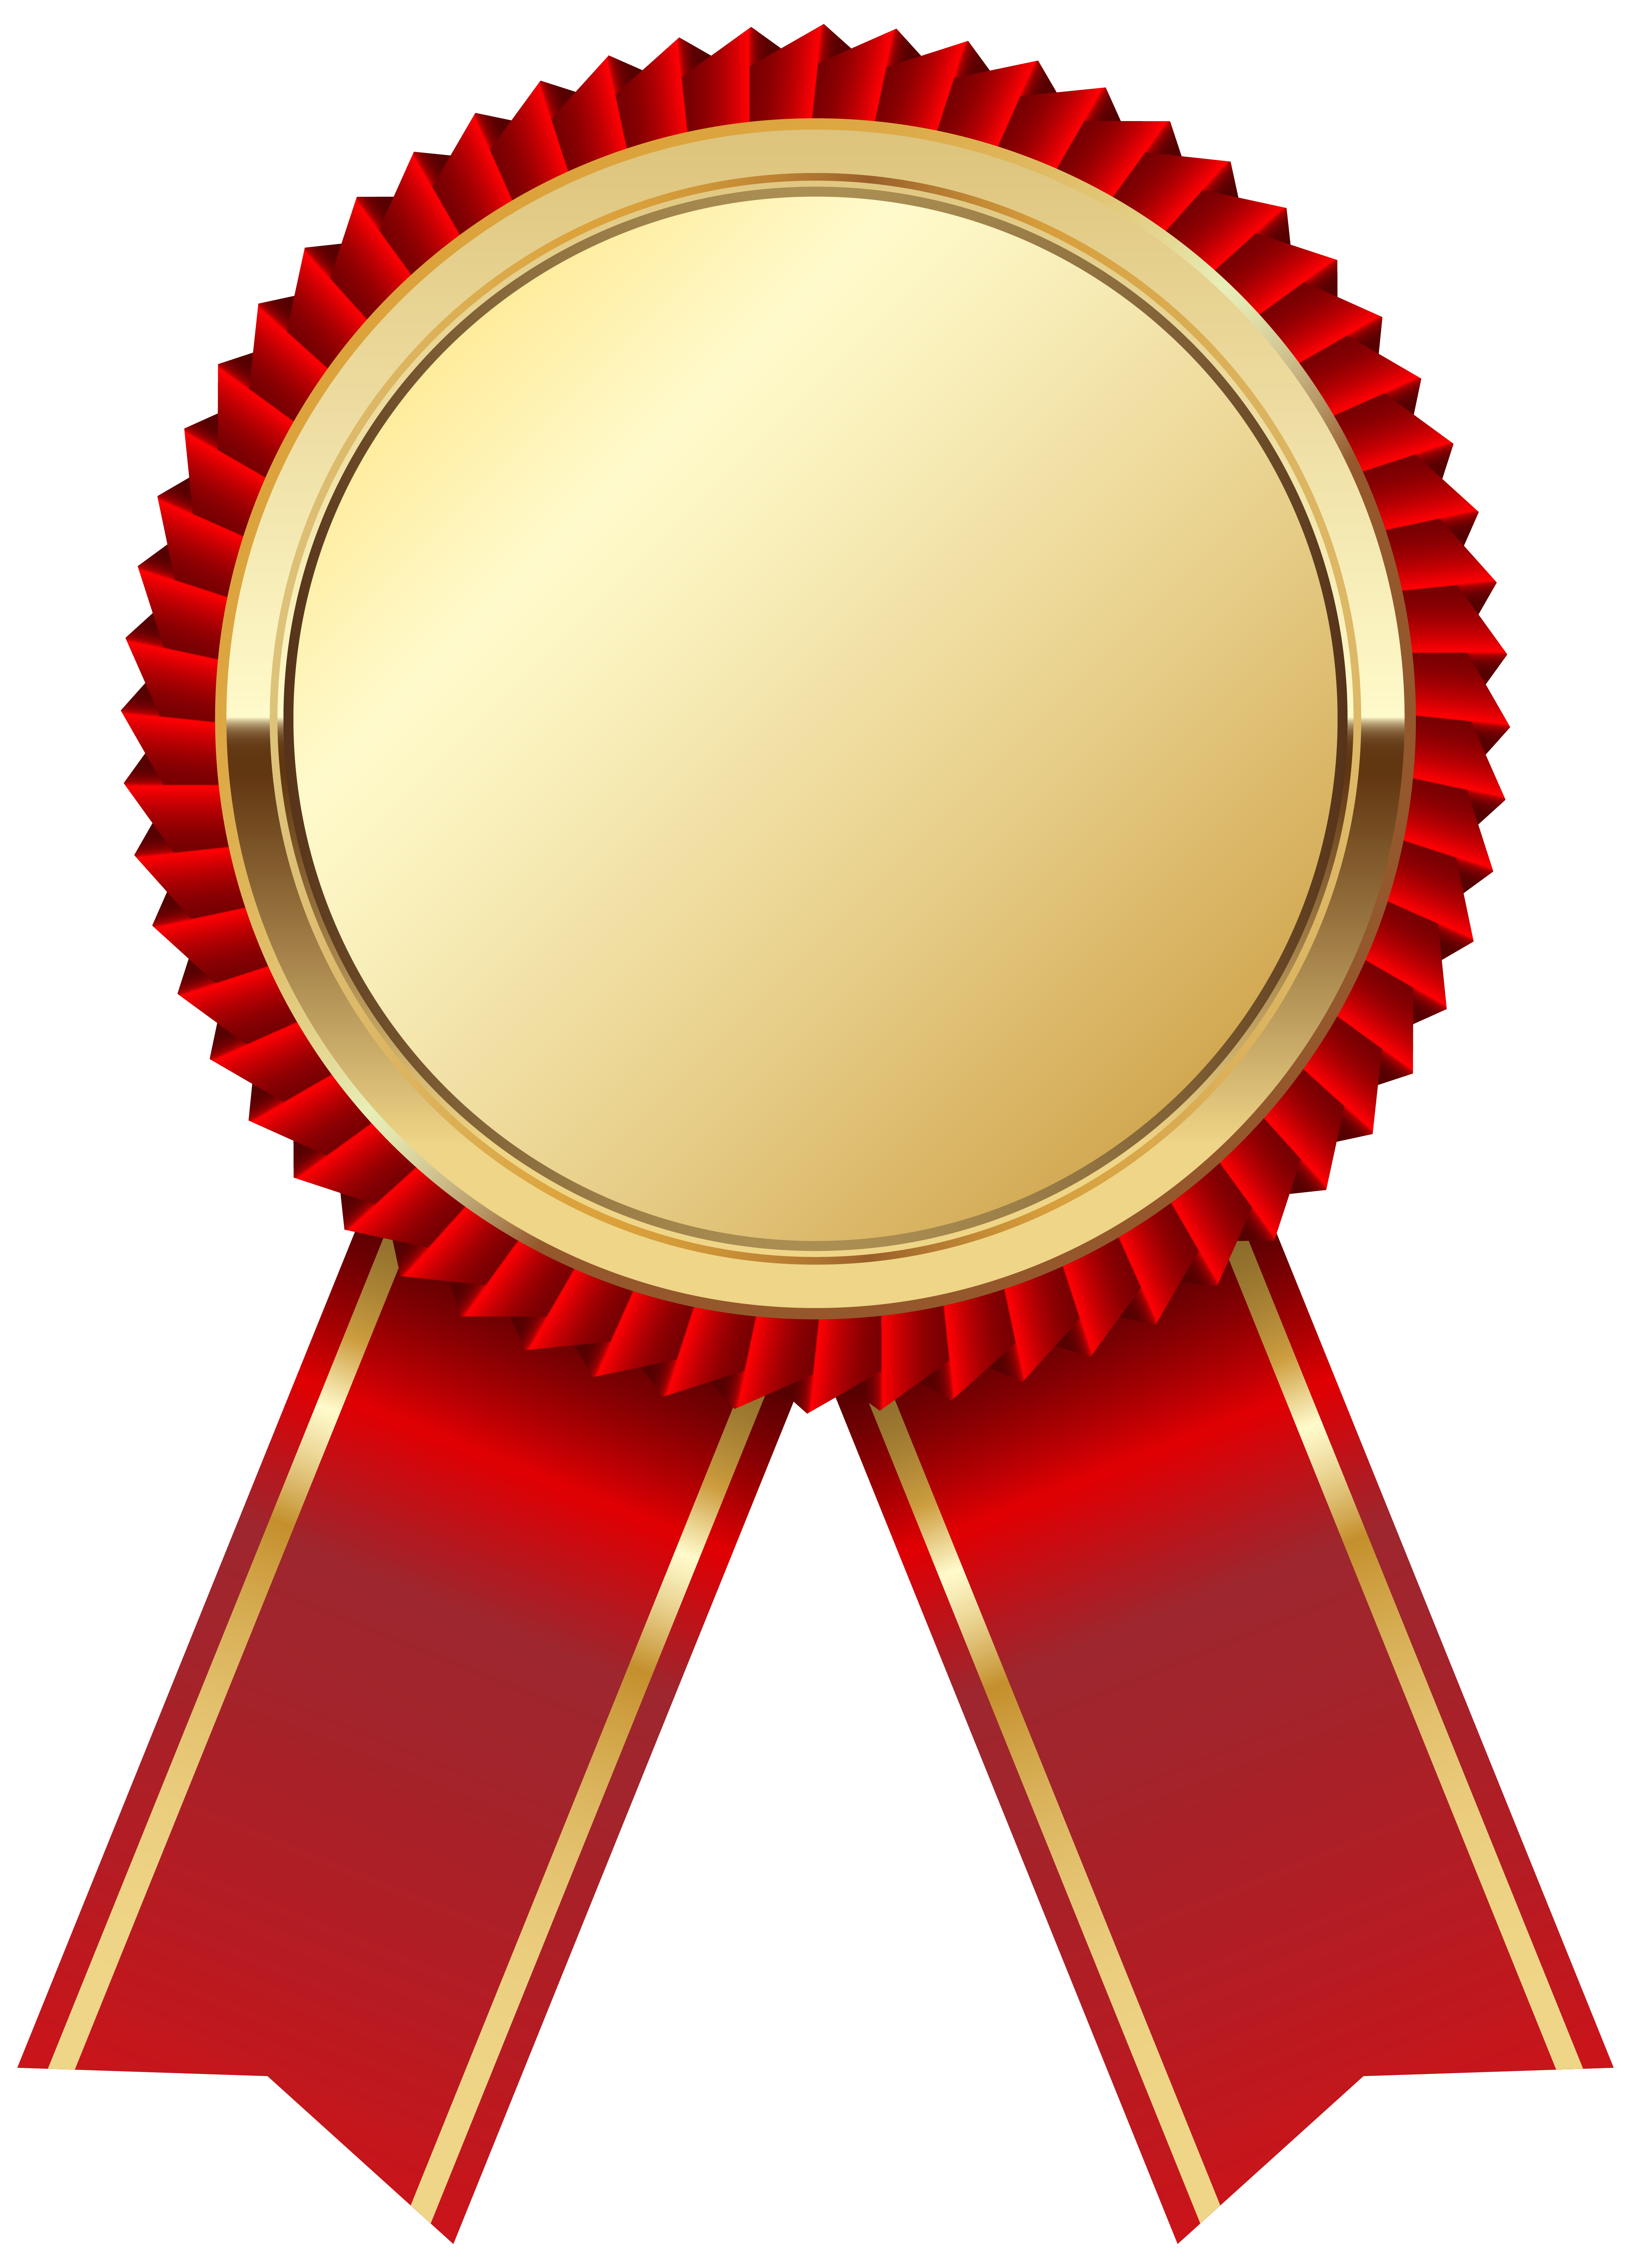 free clipart of medals - photo #34